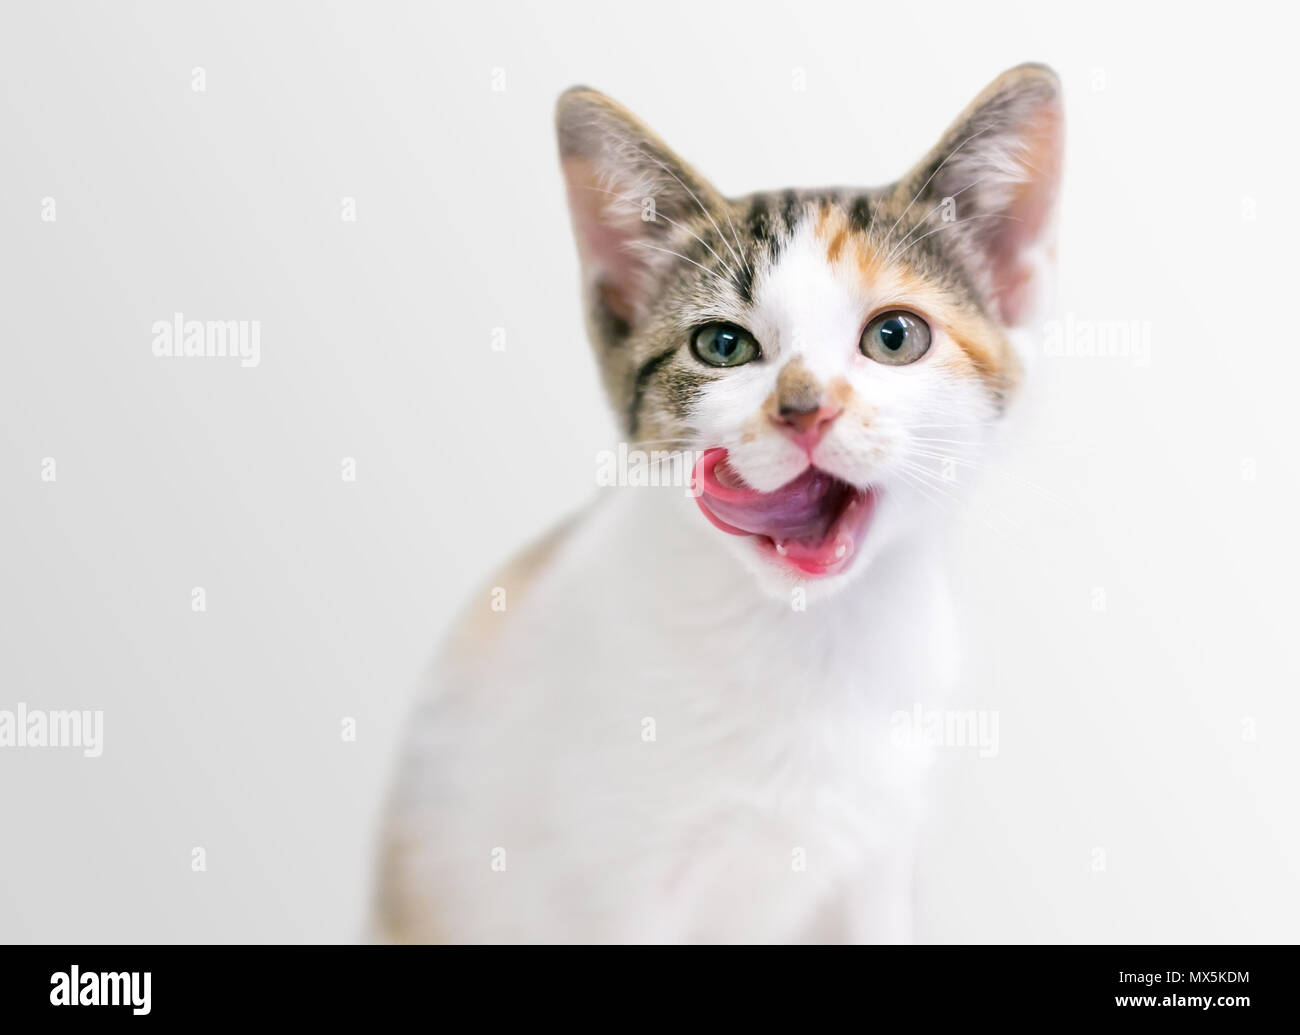 A calico tabby domestic shorthair kitten licking its lips Stock Photo